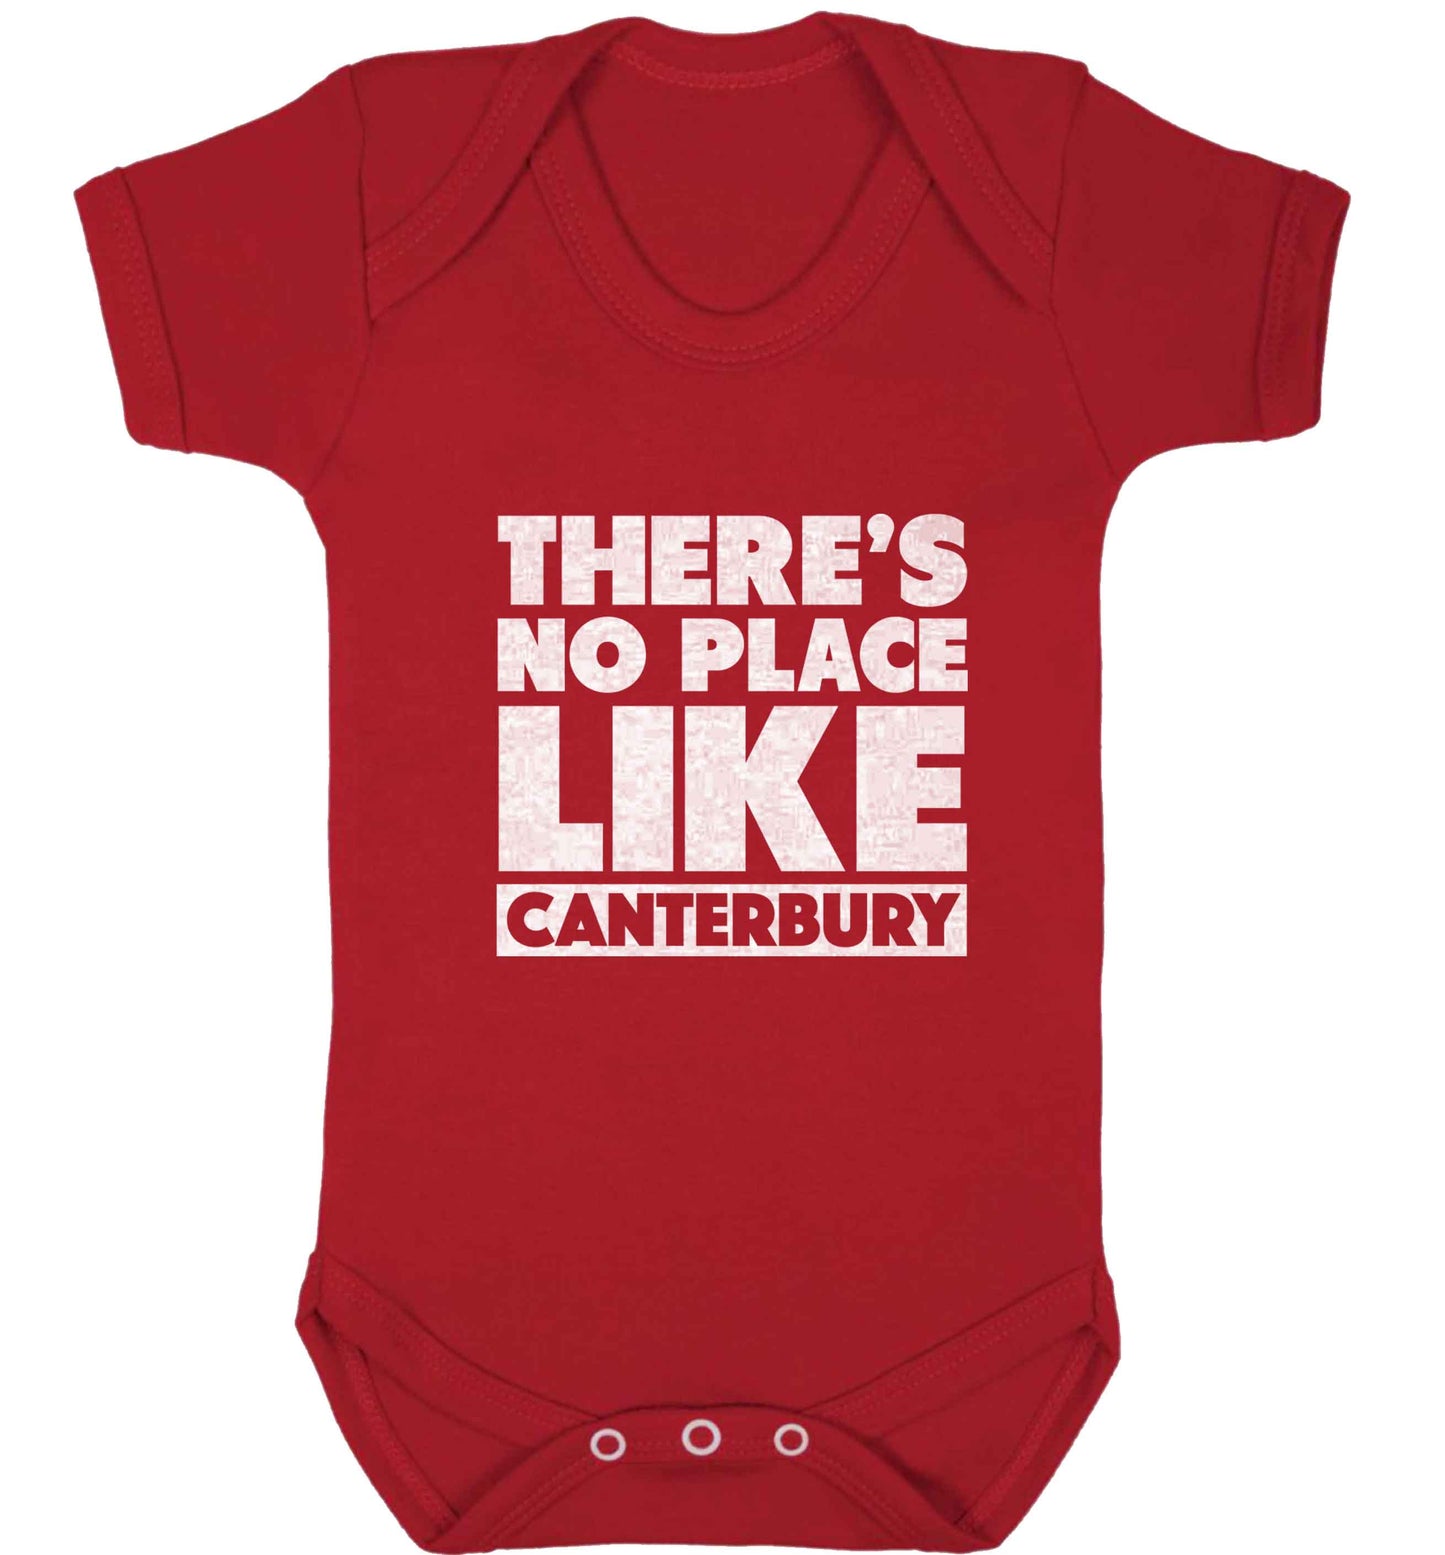 There's no place like Canterbury baby vest red 18-24 months